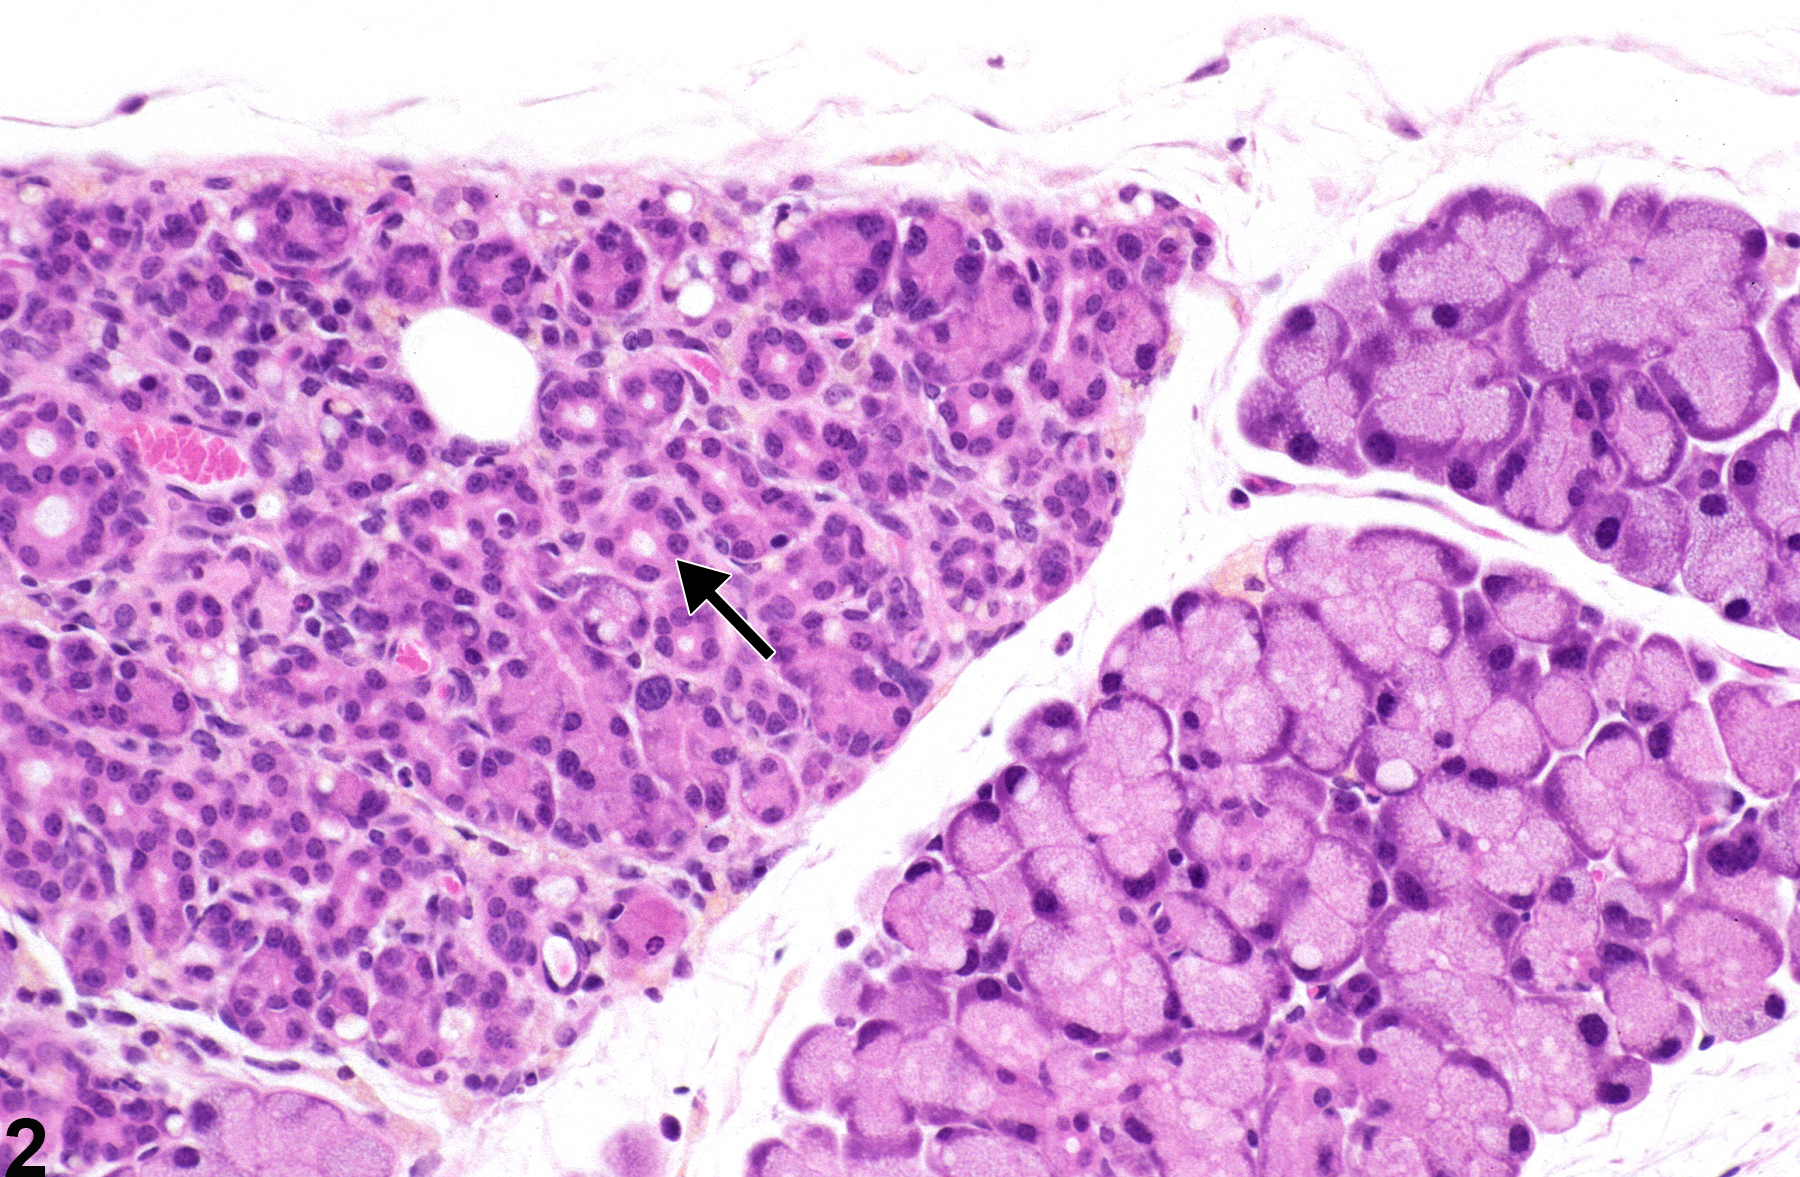 Image of atrophy in the lacrimal gland from a male B6C3F1 mouse in a chronic study